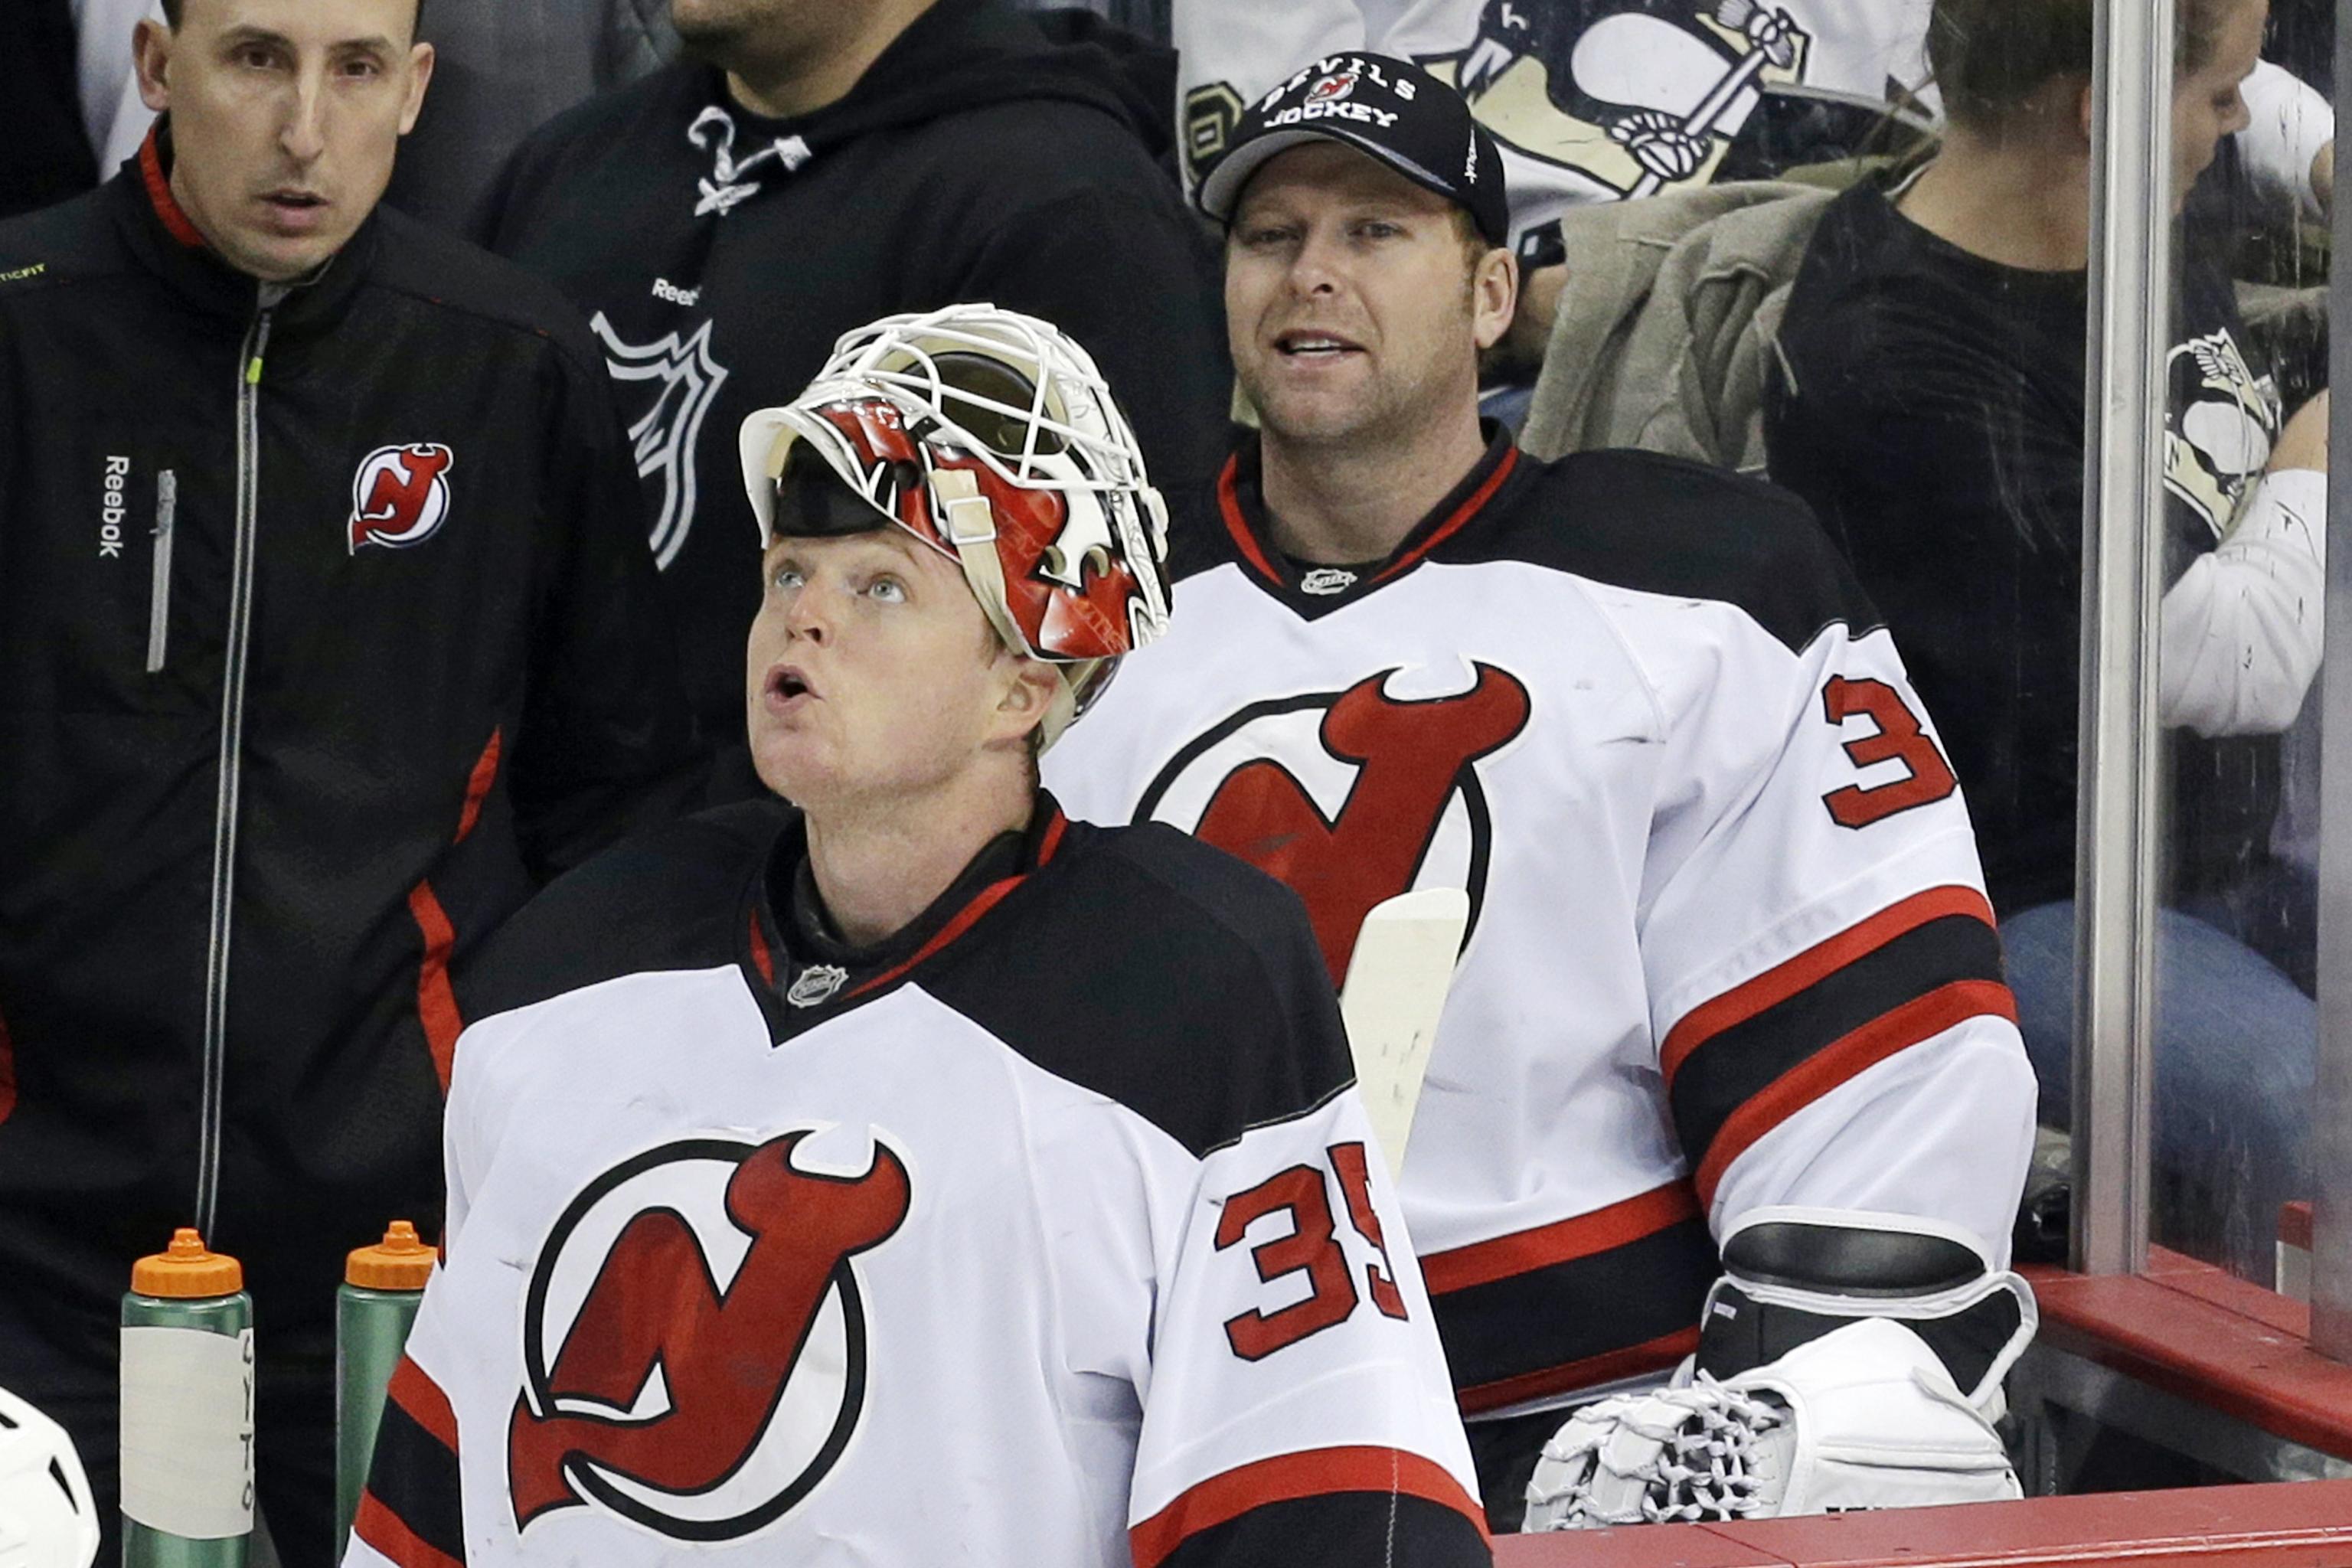 What Cory Schneider's injury means for NJ Devils